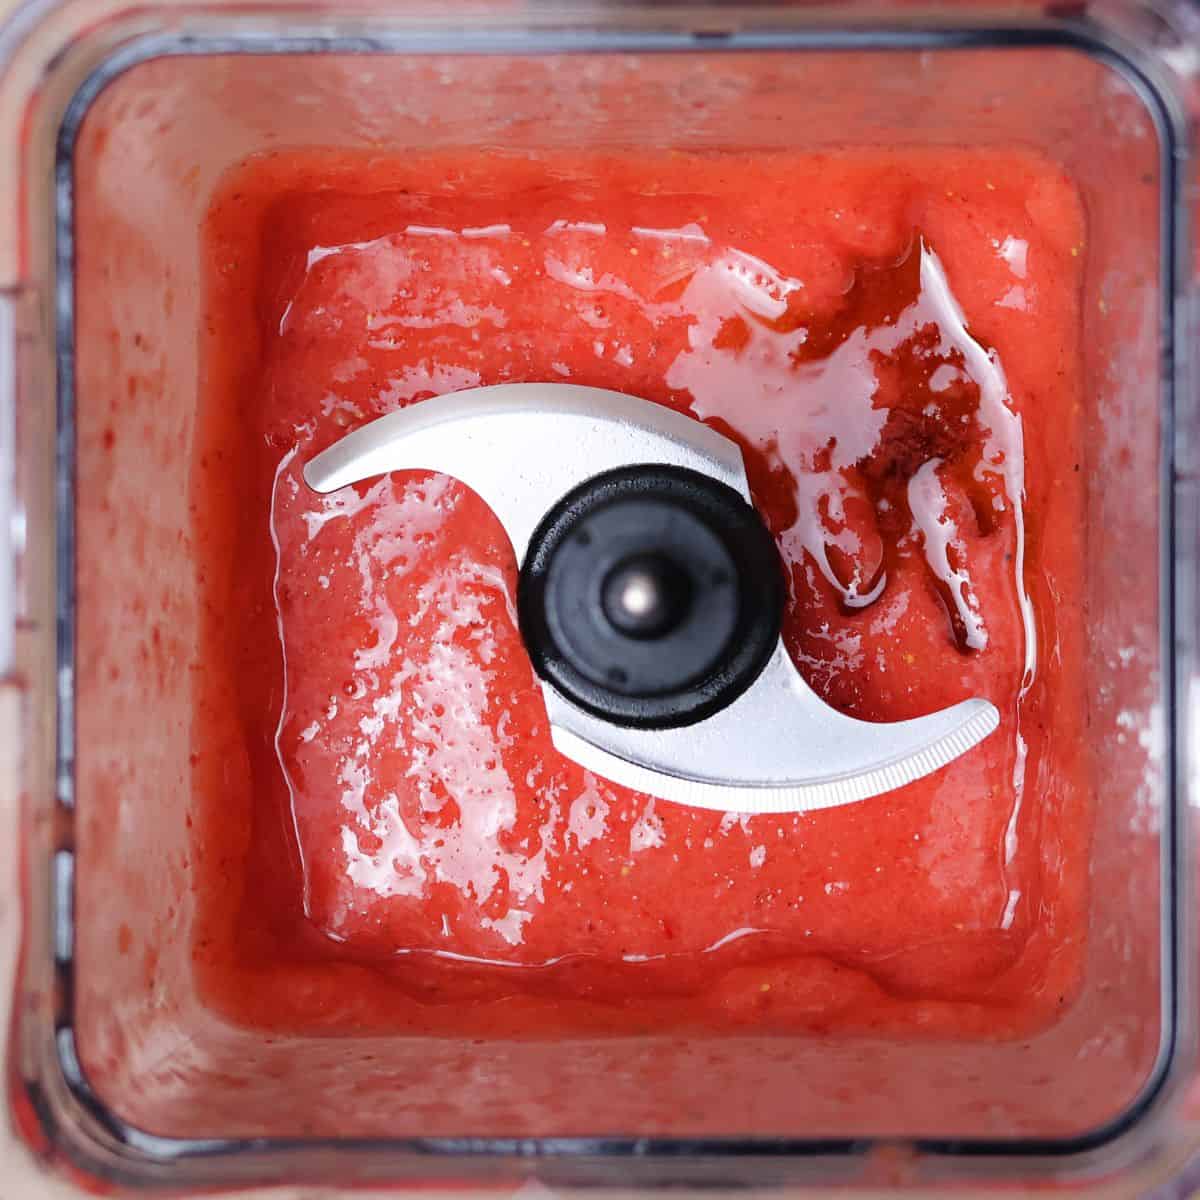 Top-down view inside a blender showing a bright red smoothie blend with added maple syrup, ready to blend again after adjusting flavors.